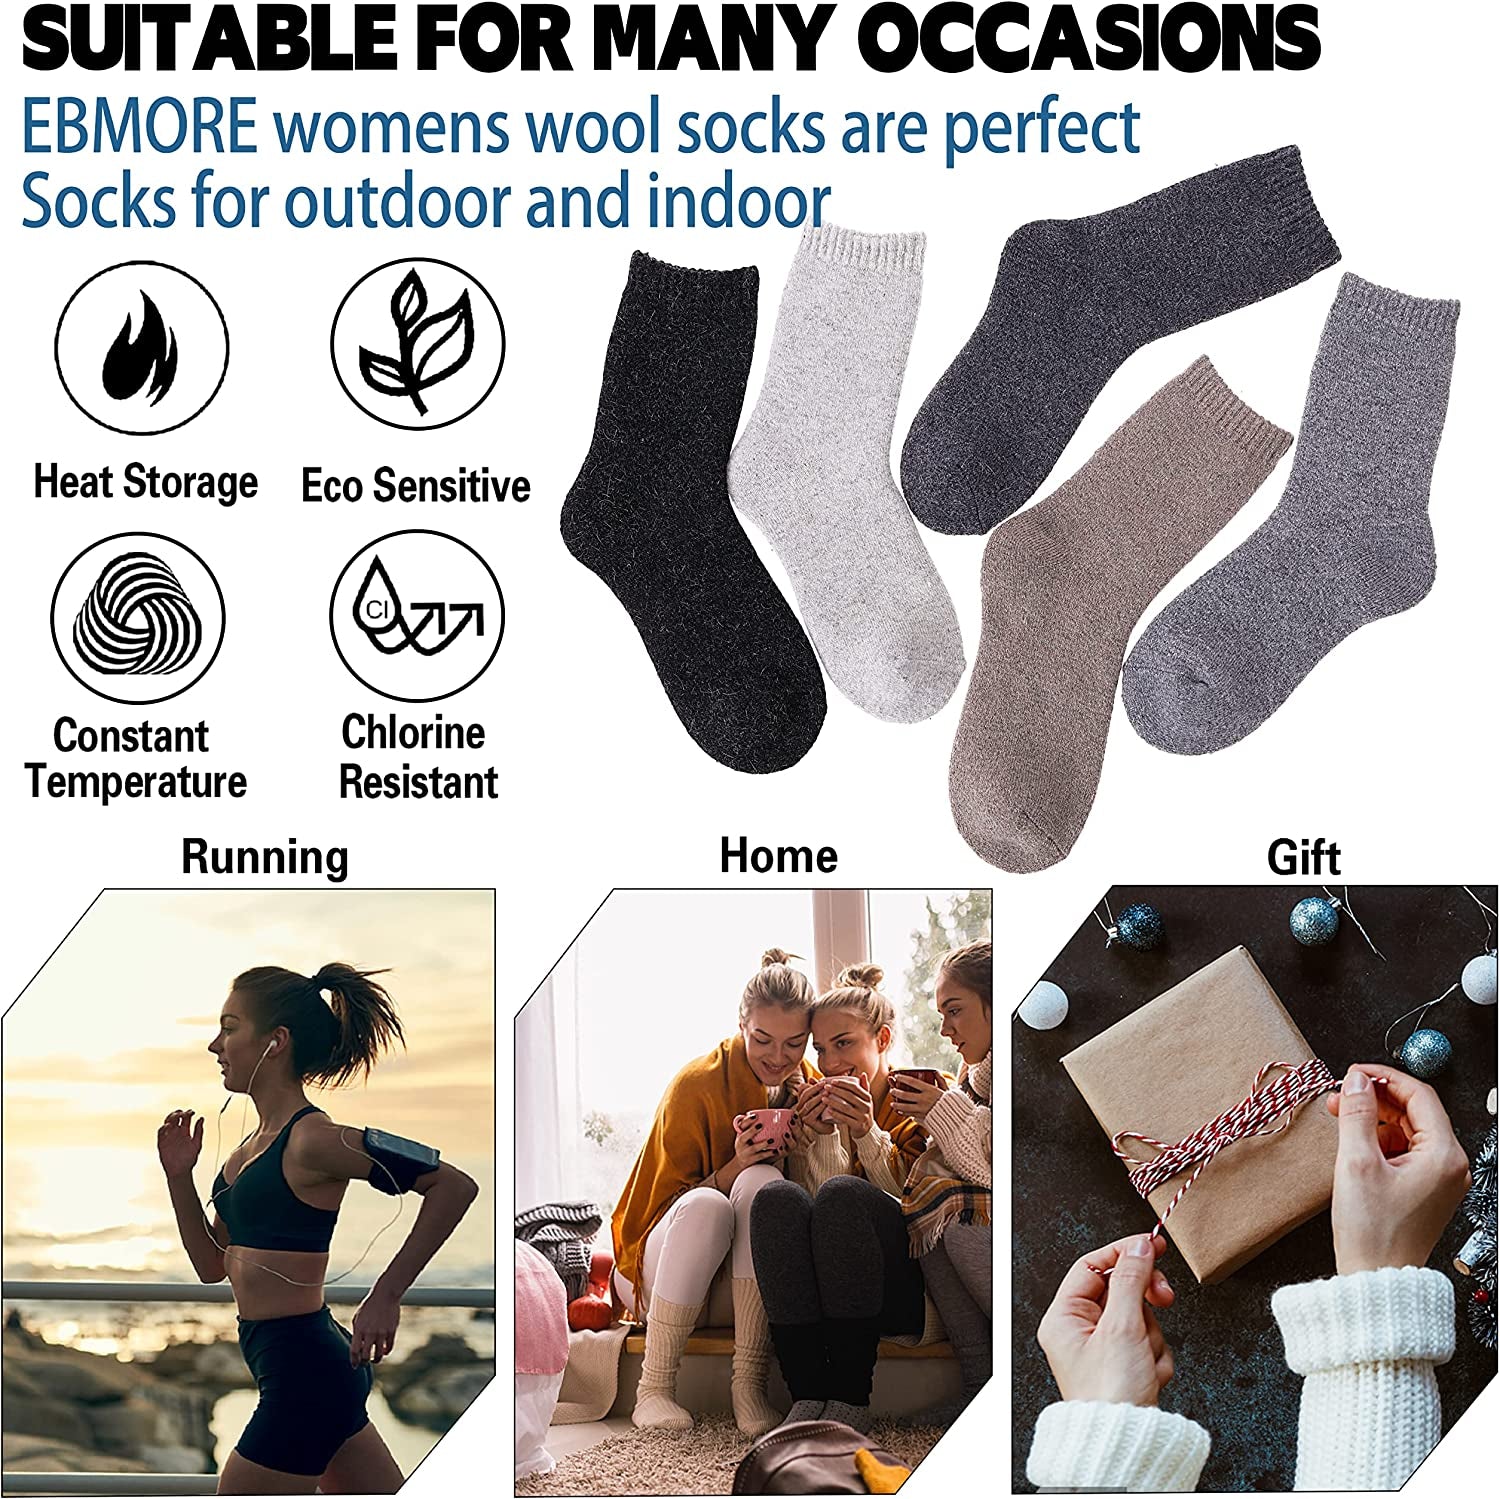  5 Pairs Women's Wool Socks Thermal Hiking Winter Boot Warm Thick Cozy Crew Comfy Work Socks for Ladies